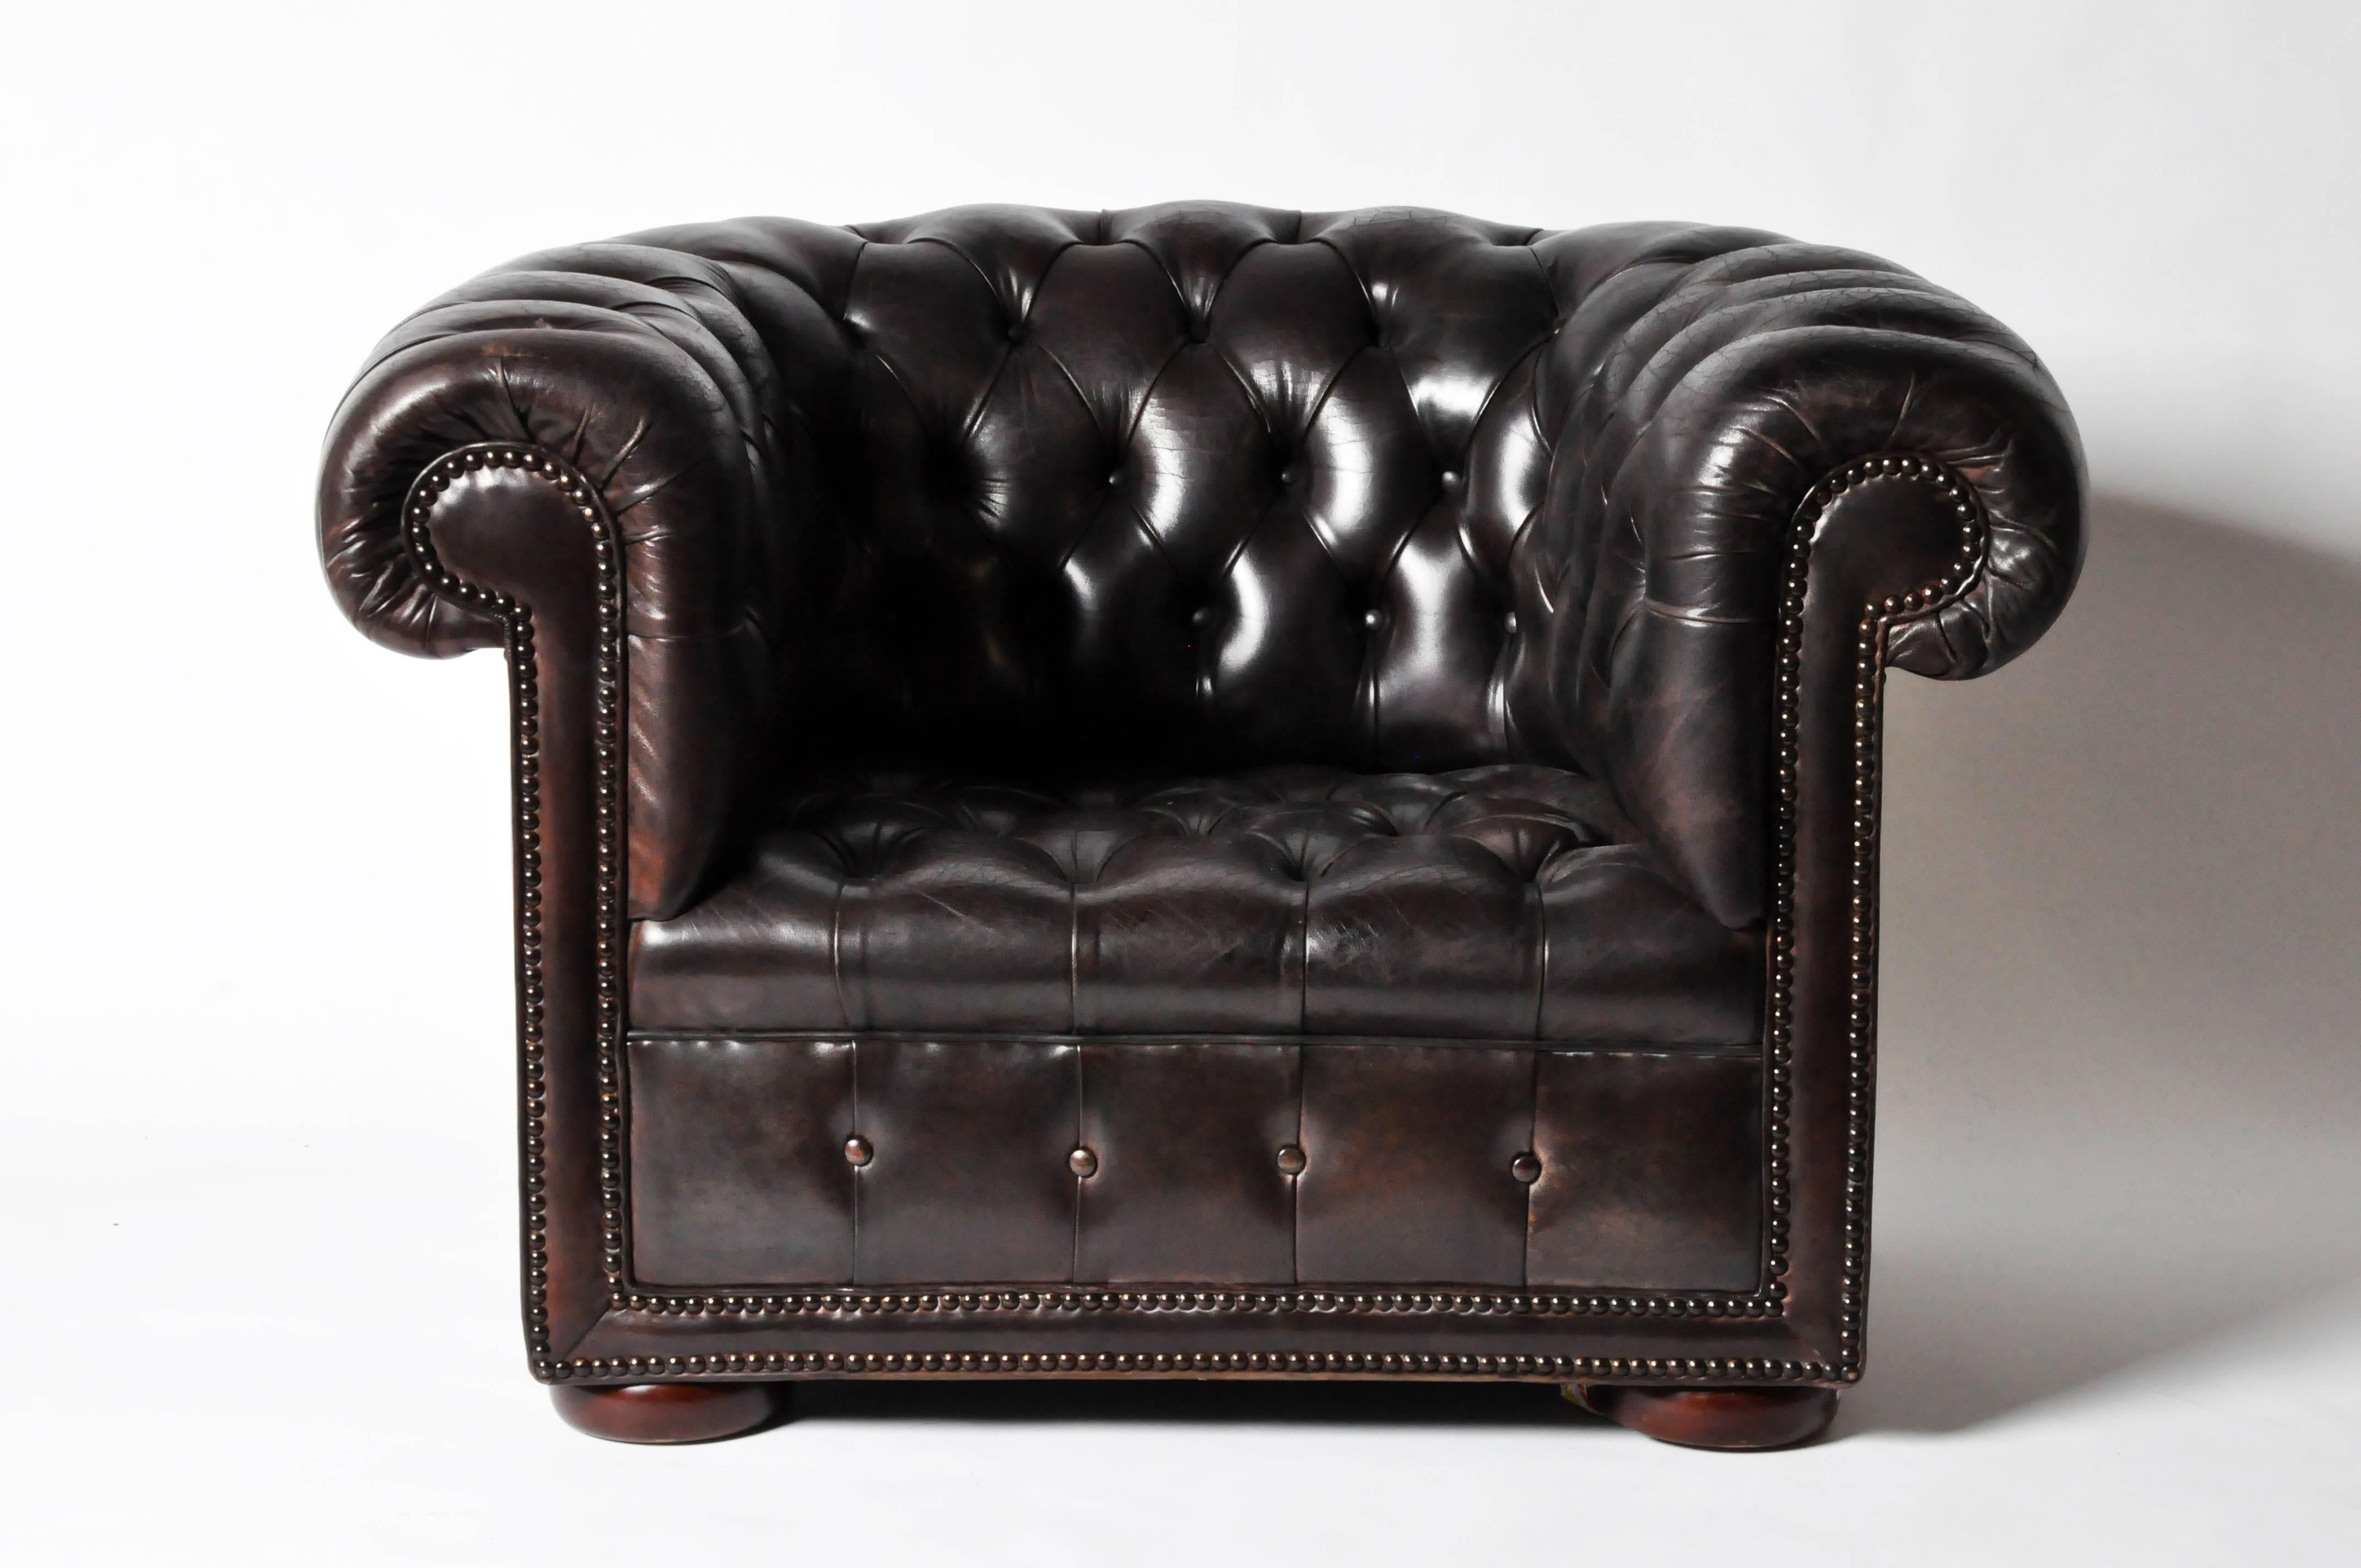 This classic set is the definition of old fashioned luxury. True to form and style, a myriad of button tufts create a quilted texture that covers the back, seat and rolled arms of each piece. The unique design and choice of leather upholstery is